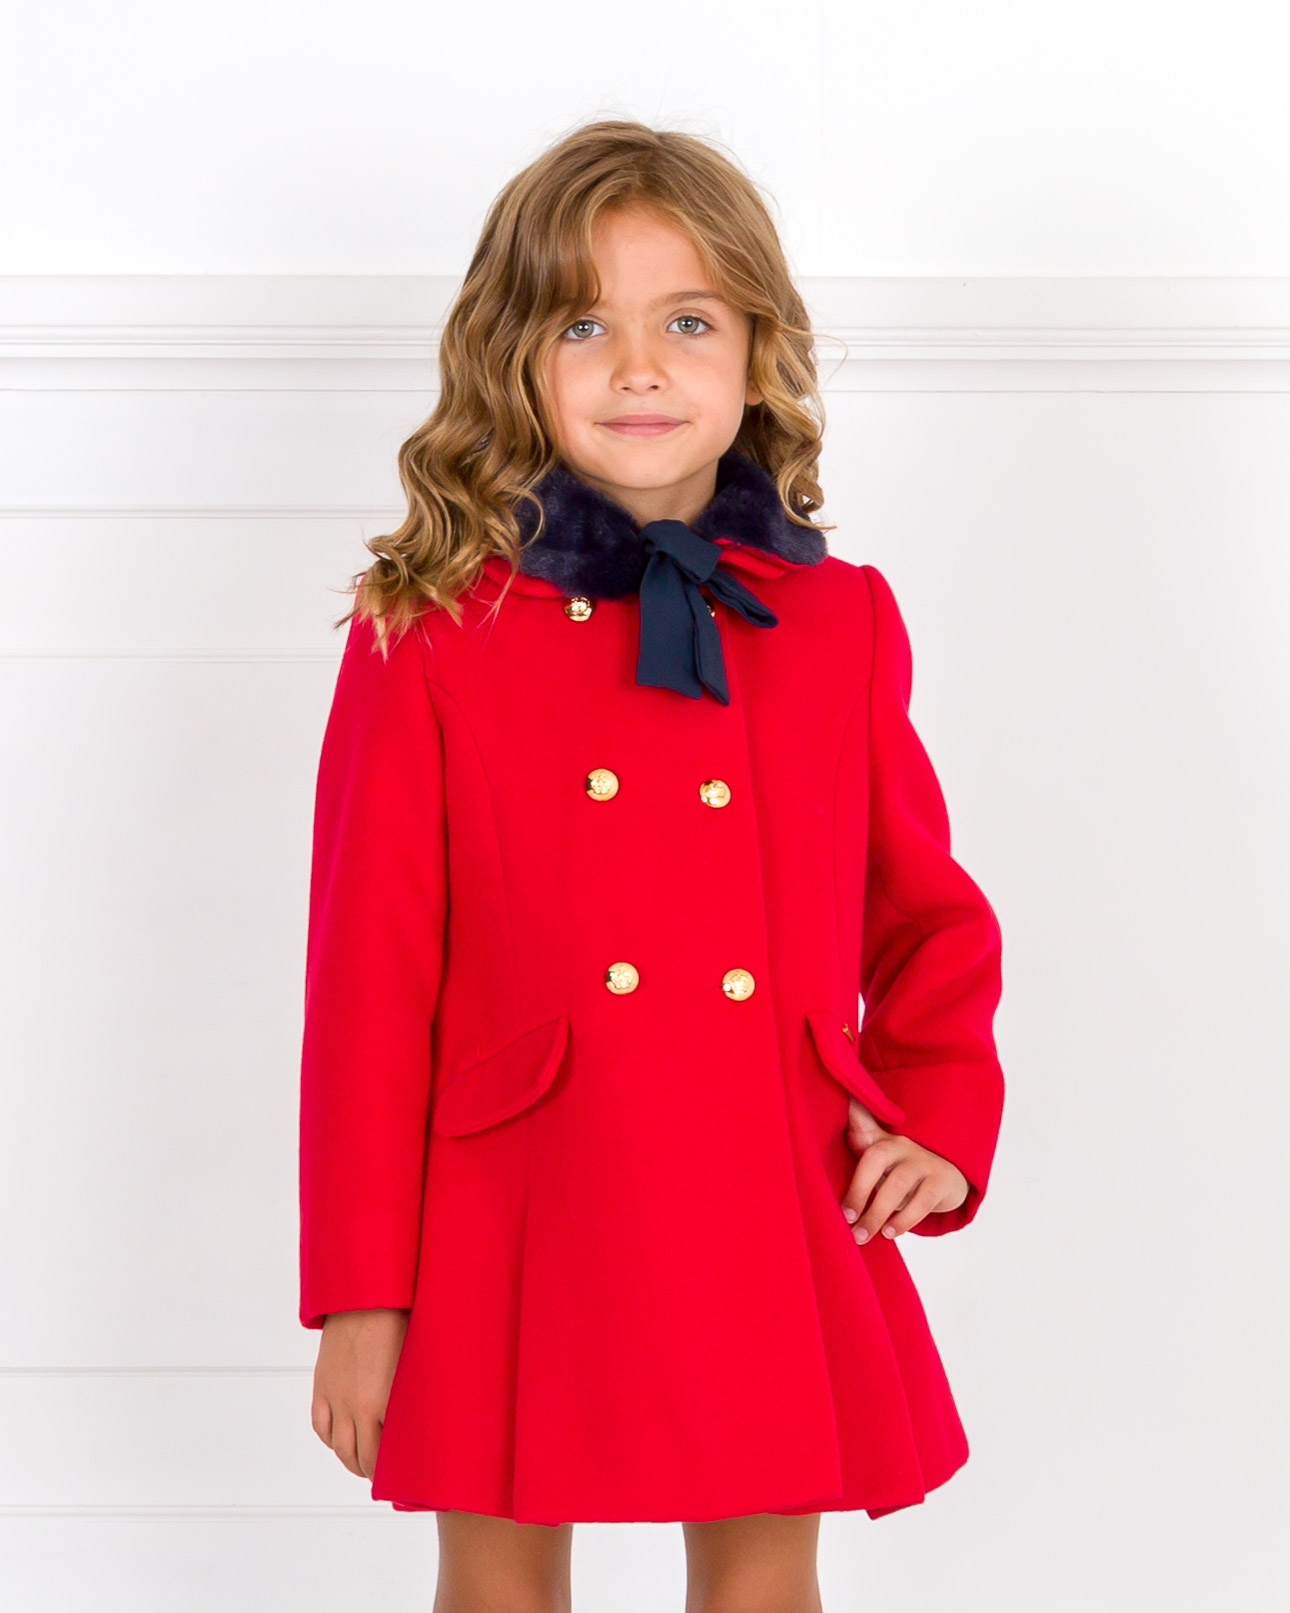 Psicológico ético siga adelante Dolce Petit Girls Red Coat & Blue Synthetic Fur Collar | Missbaby